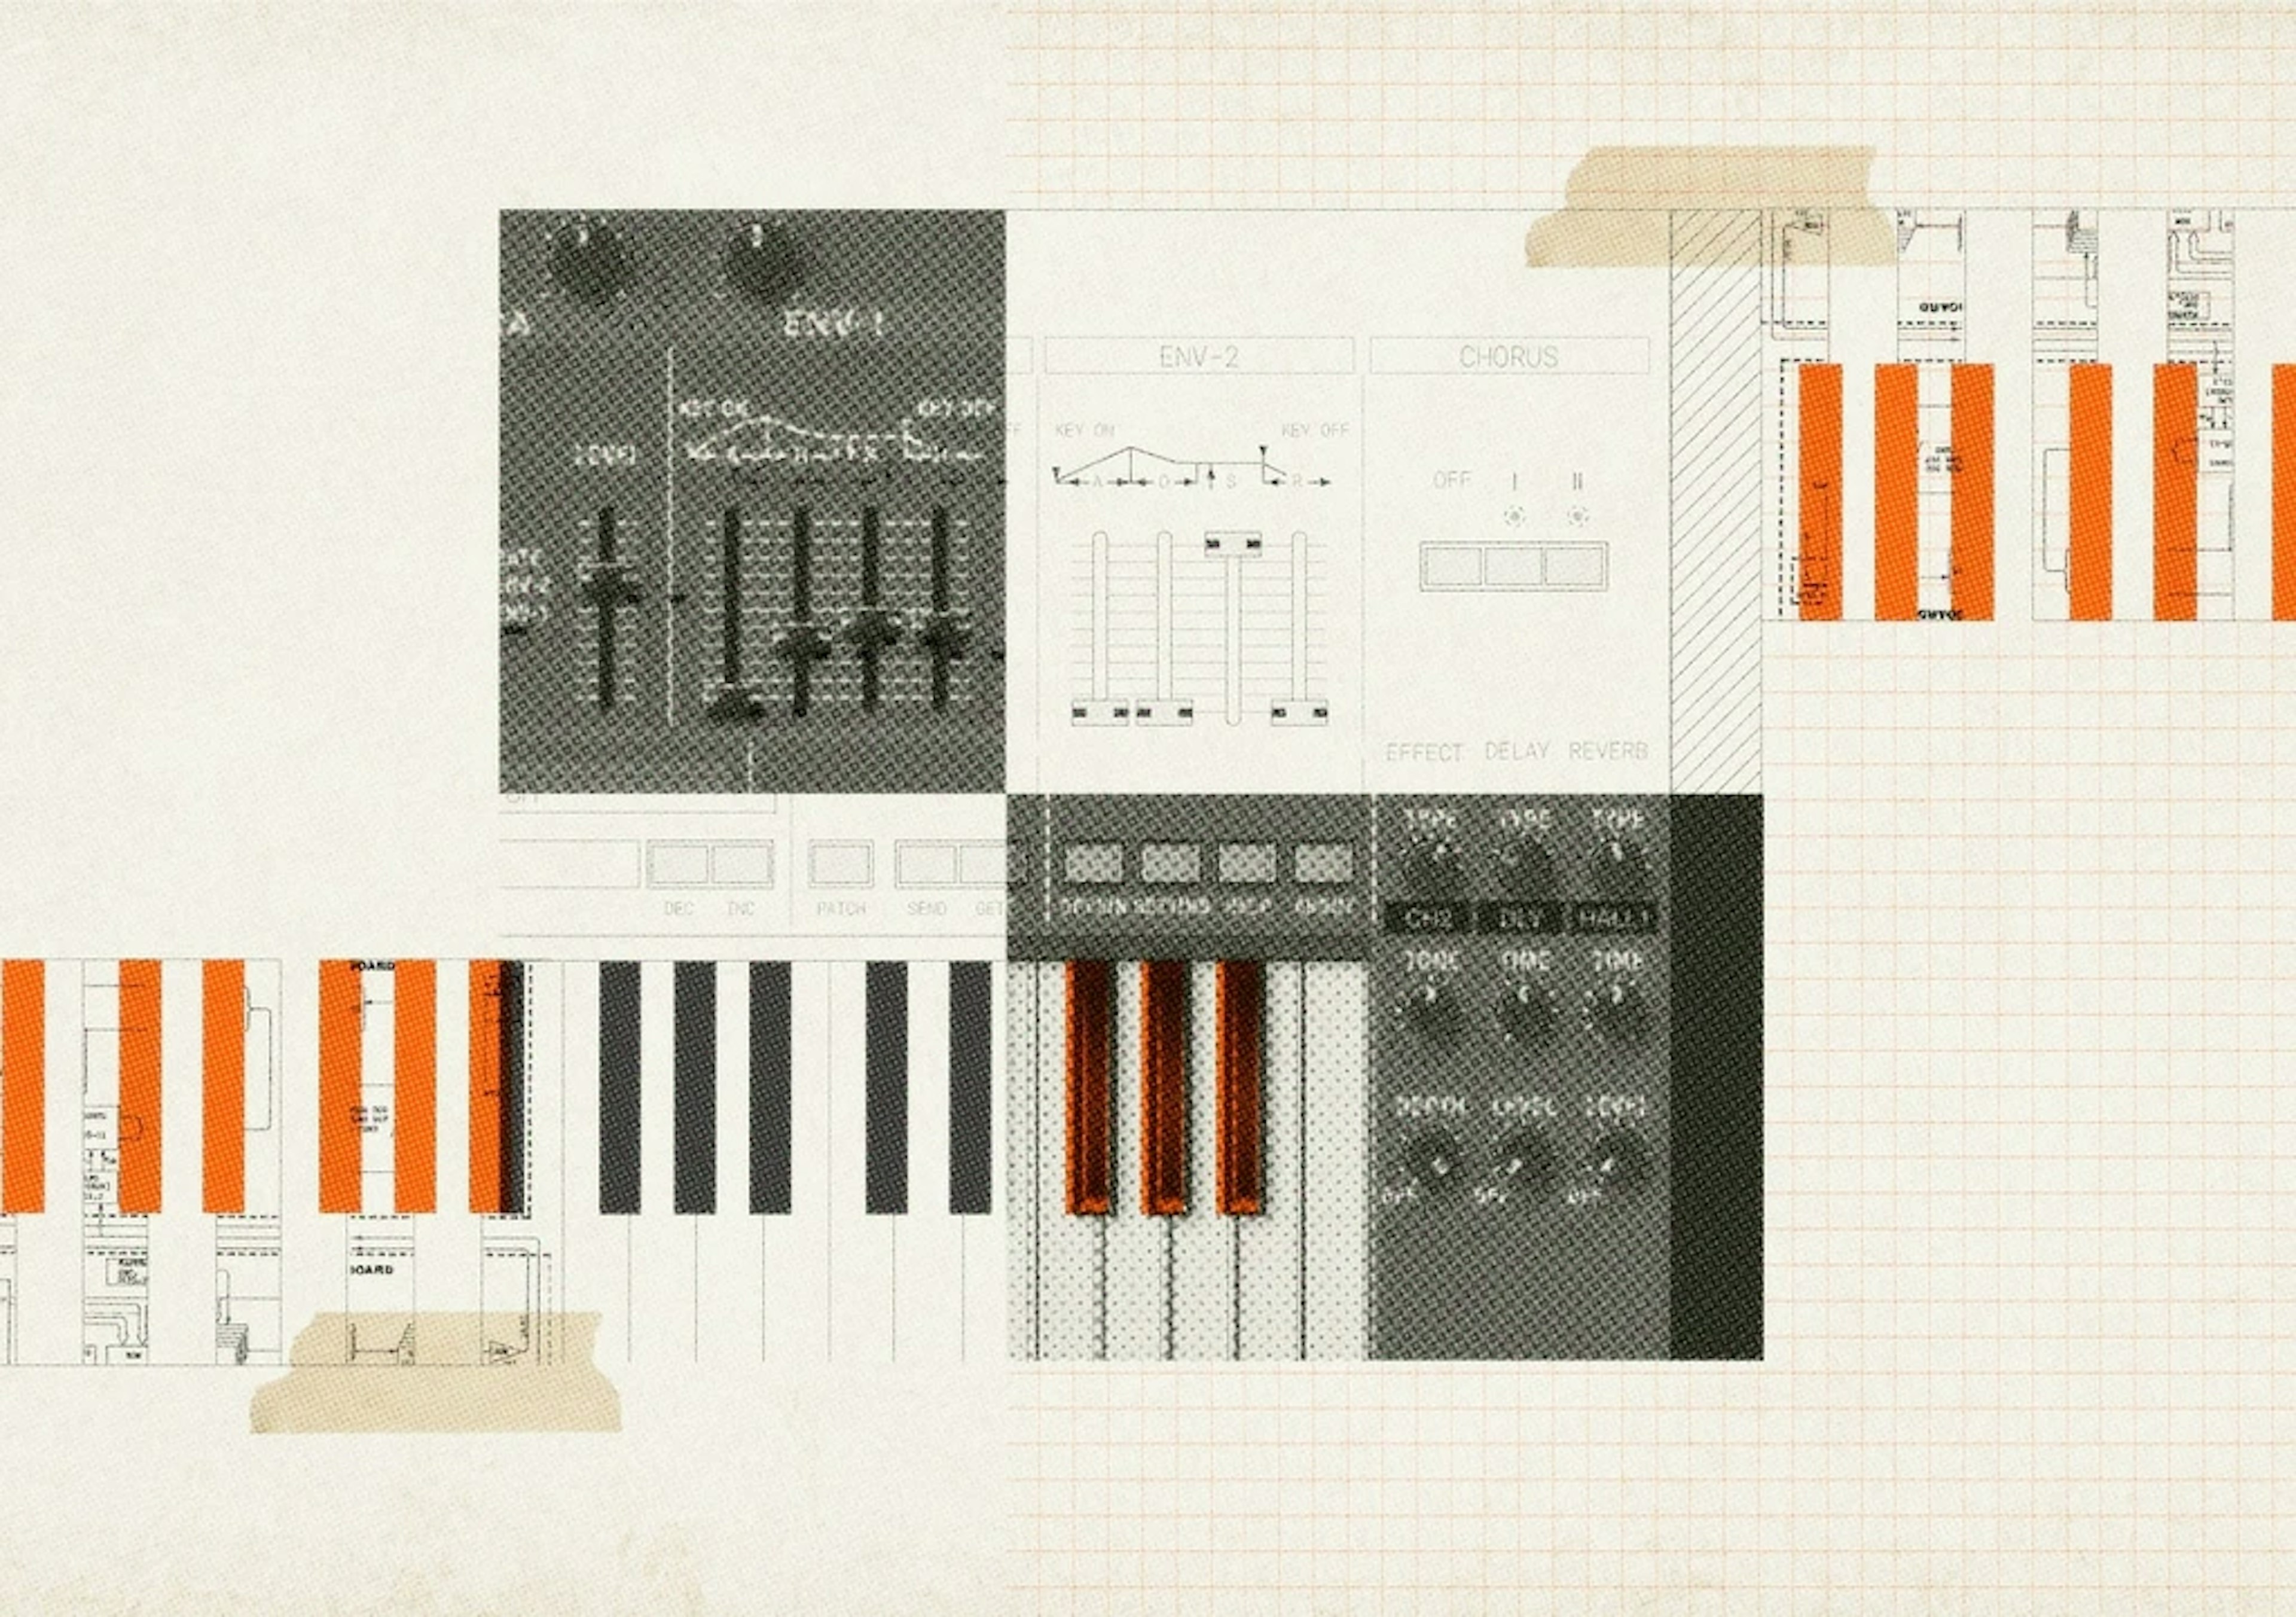 Synthesizers And Design:A Musical Perspective On User Interfaces.